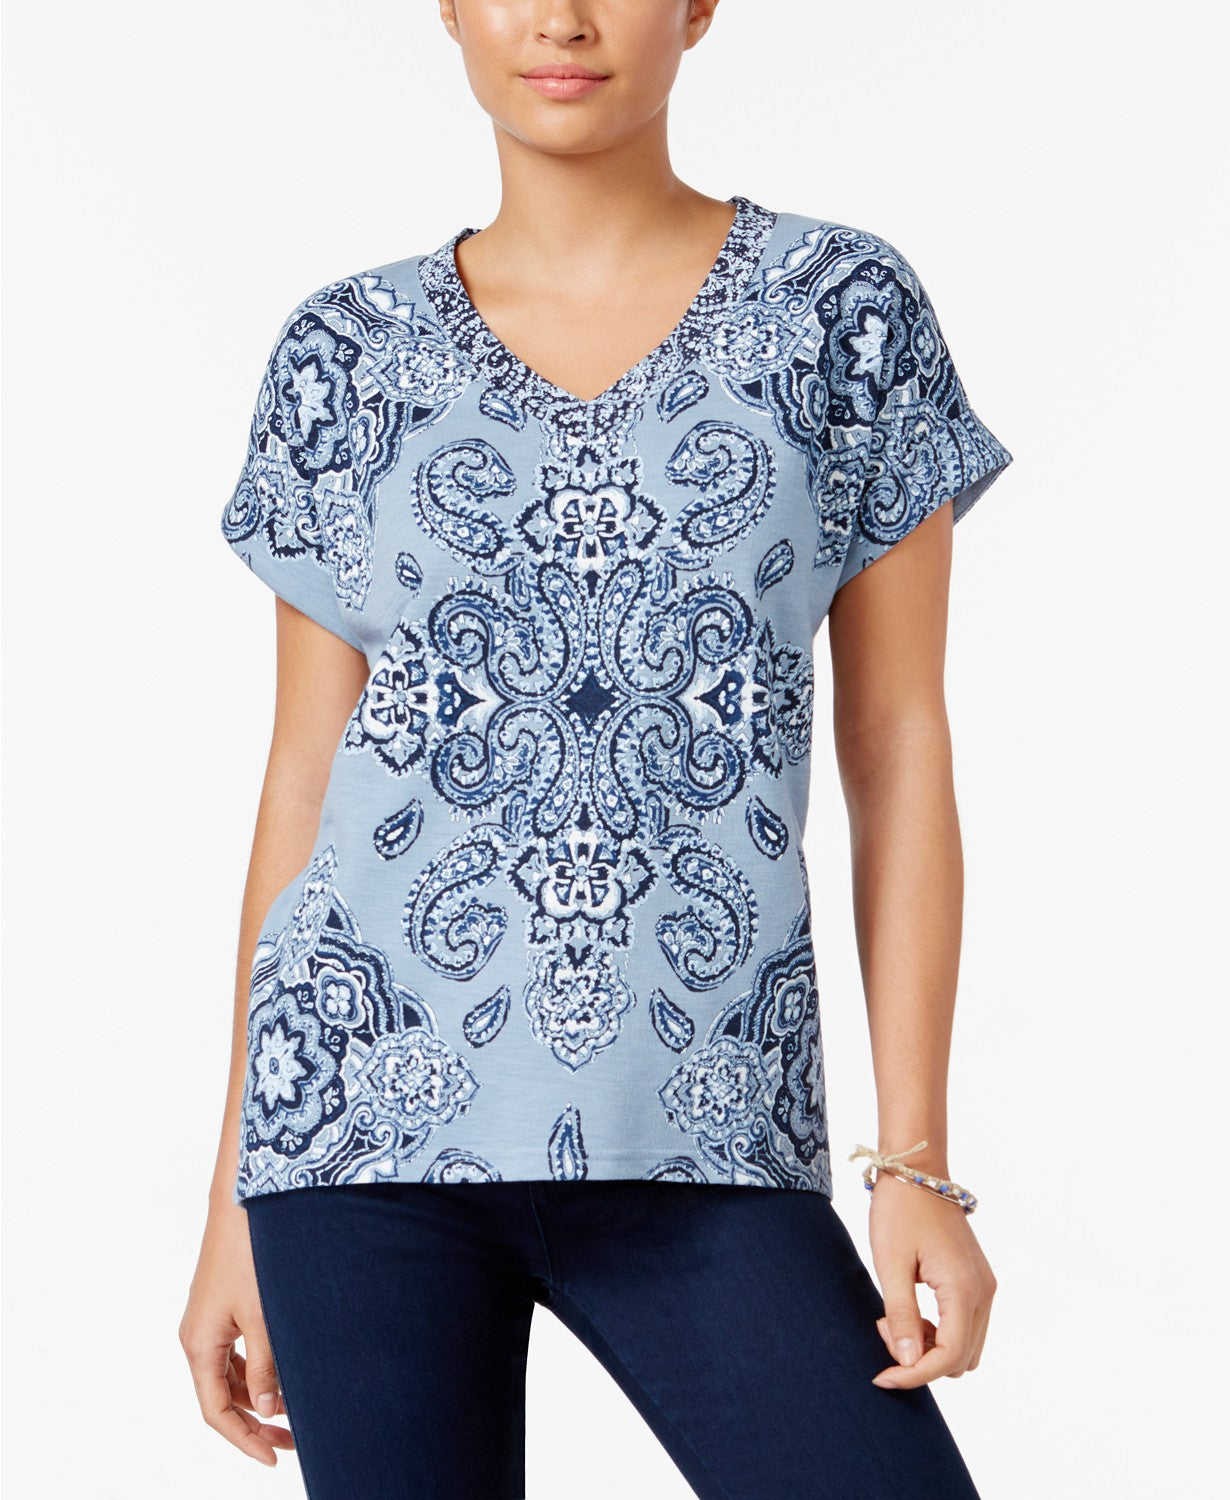 Style Co Printed Cuffed-Sleeve Top Tile Vision Fog M